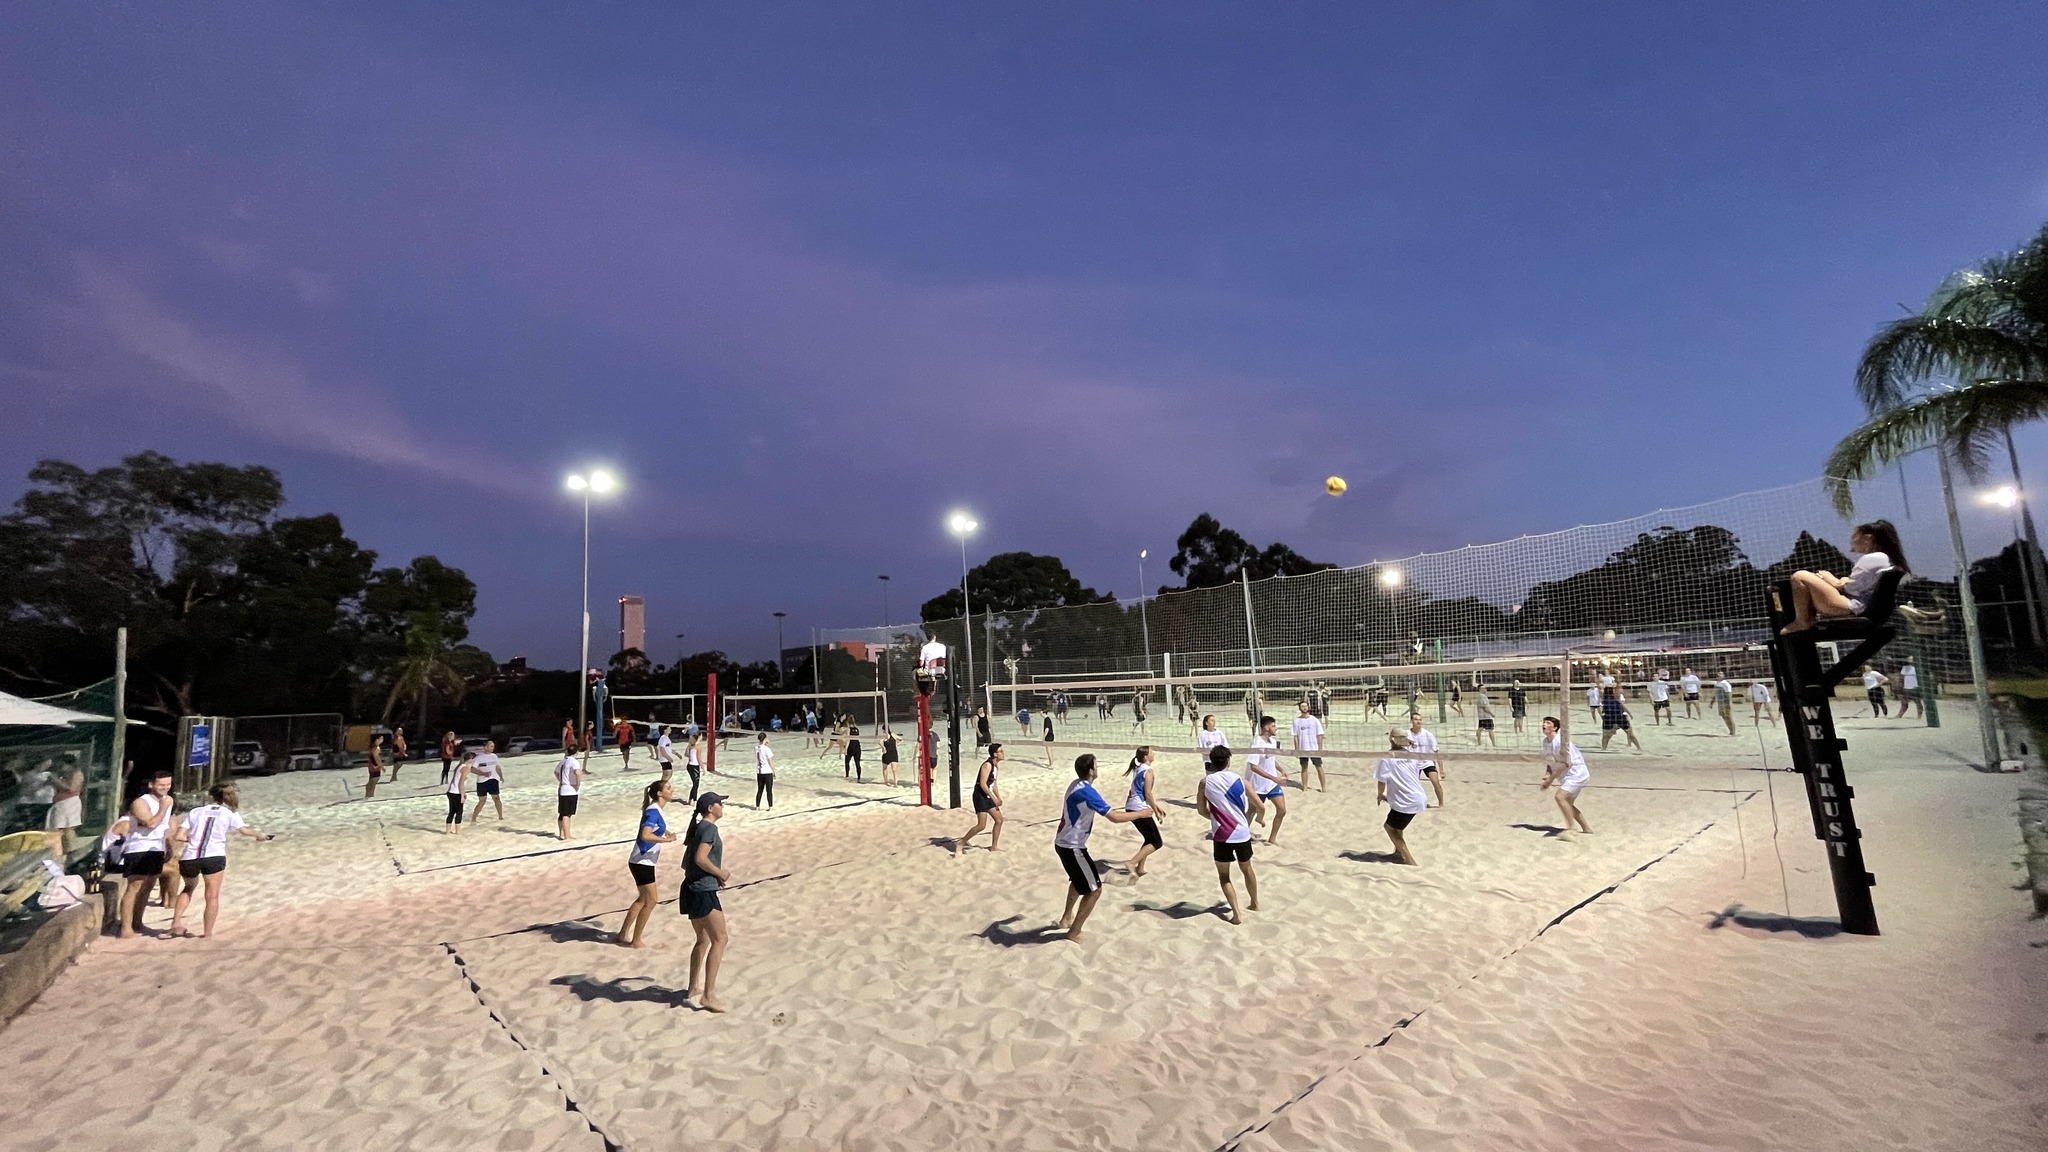 Sand Volley Australia Cover Image